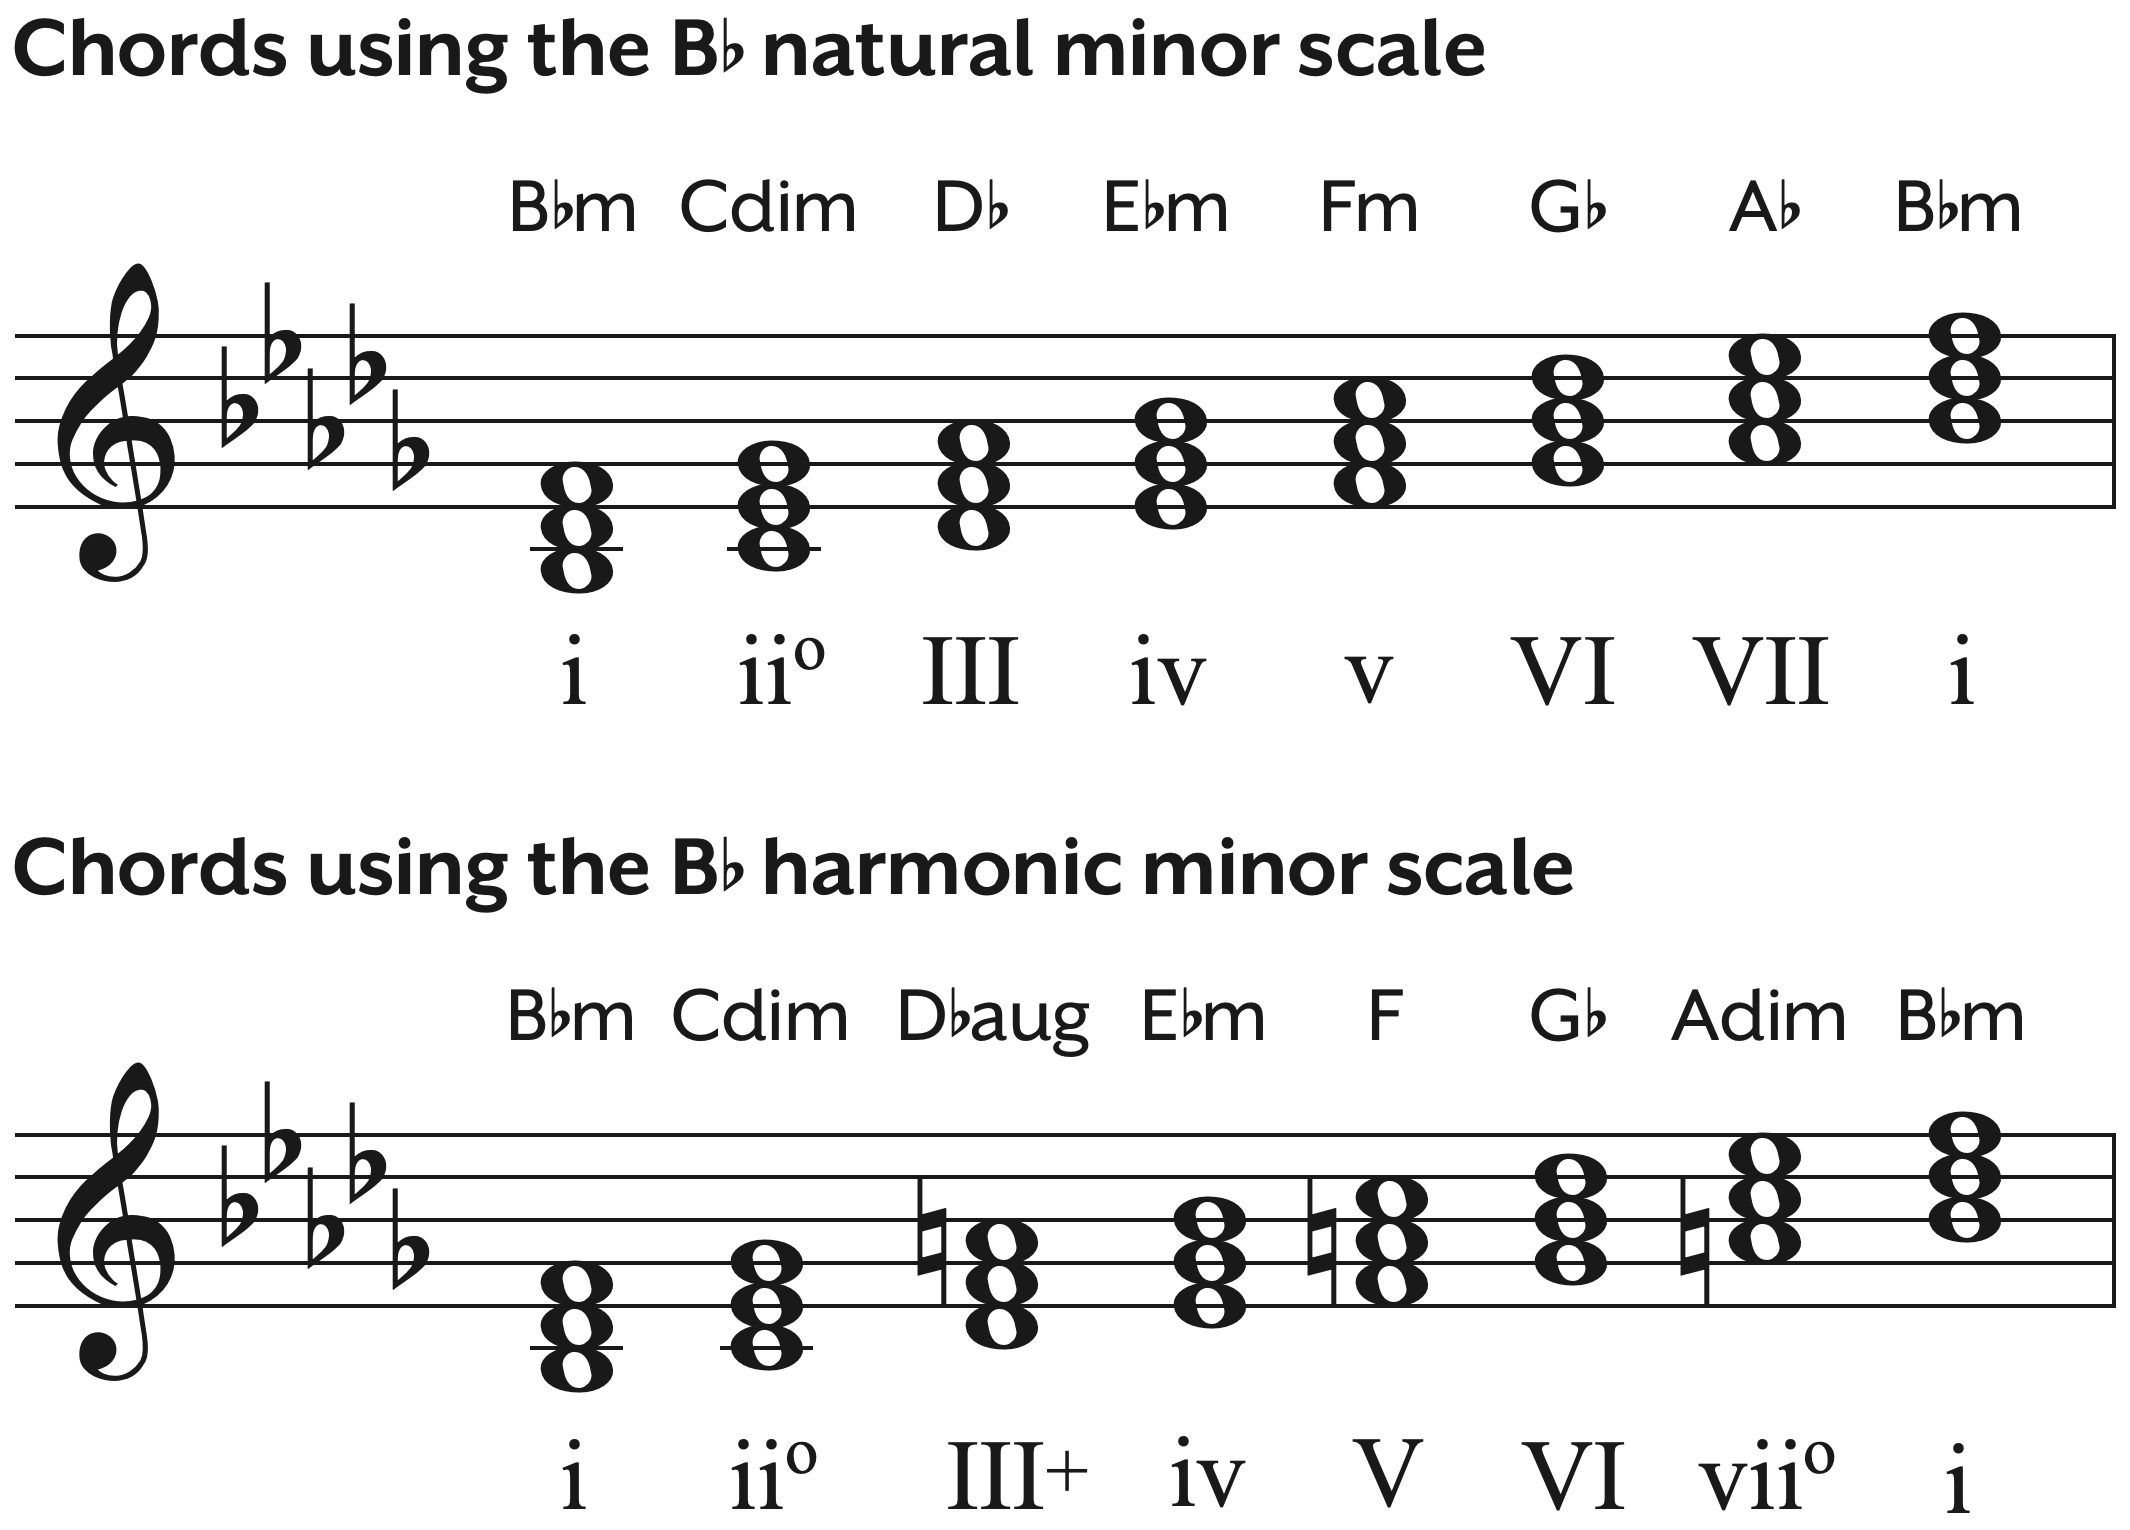 Chords using the B-flat minor scale in all three forms, natural, harmonic, and melodic, written on the treble clef as triads built on each tone of the scale with chord symbols and Roman numerals